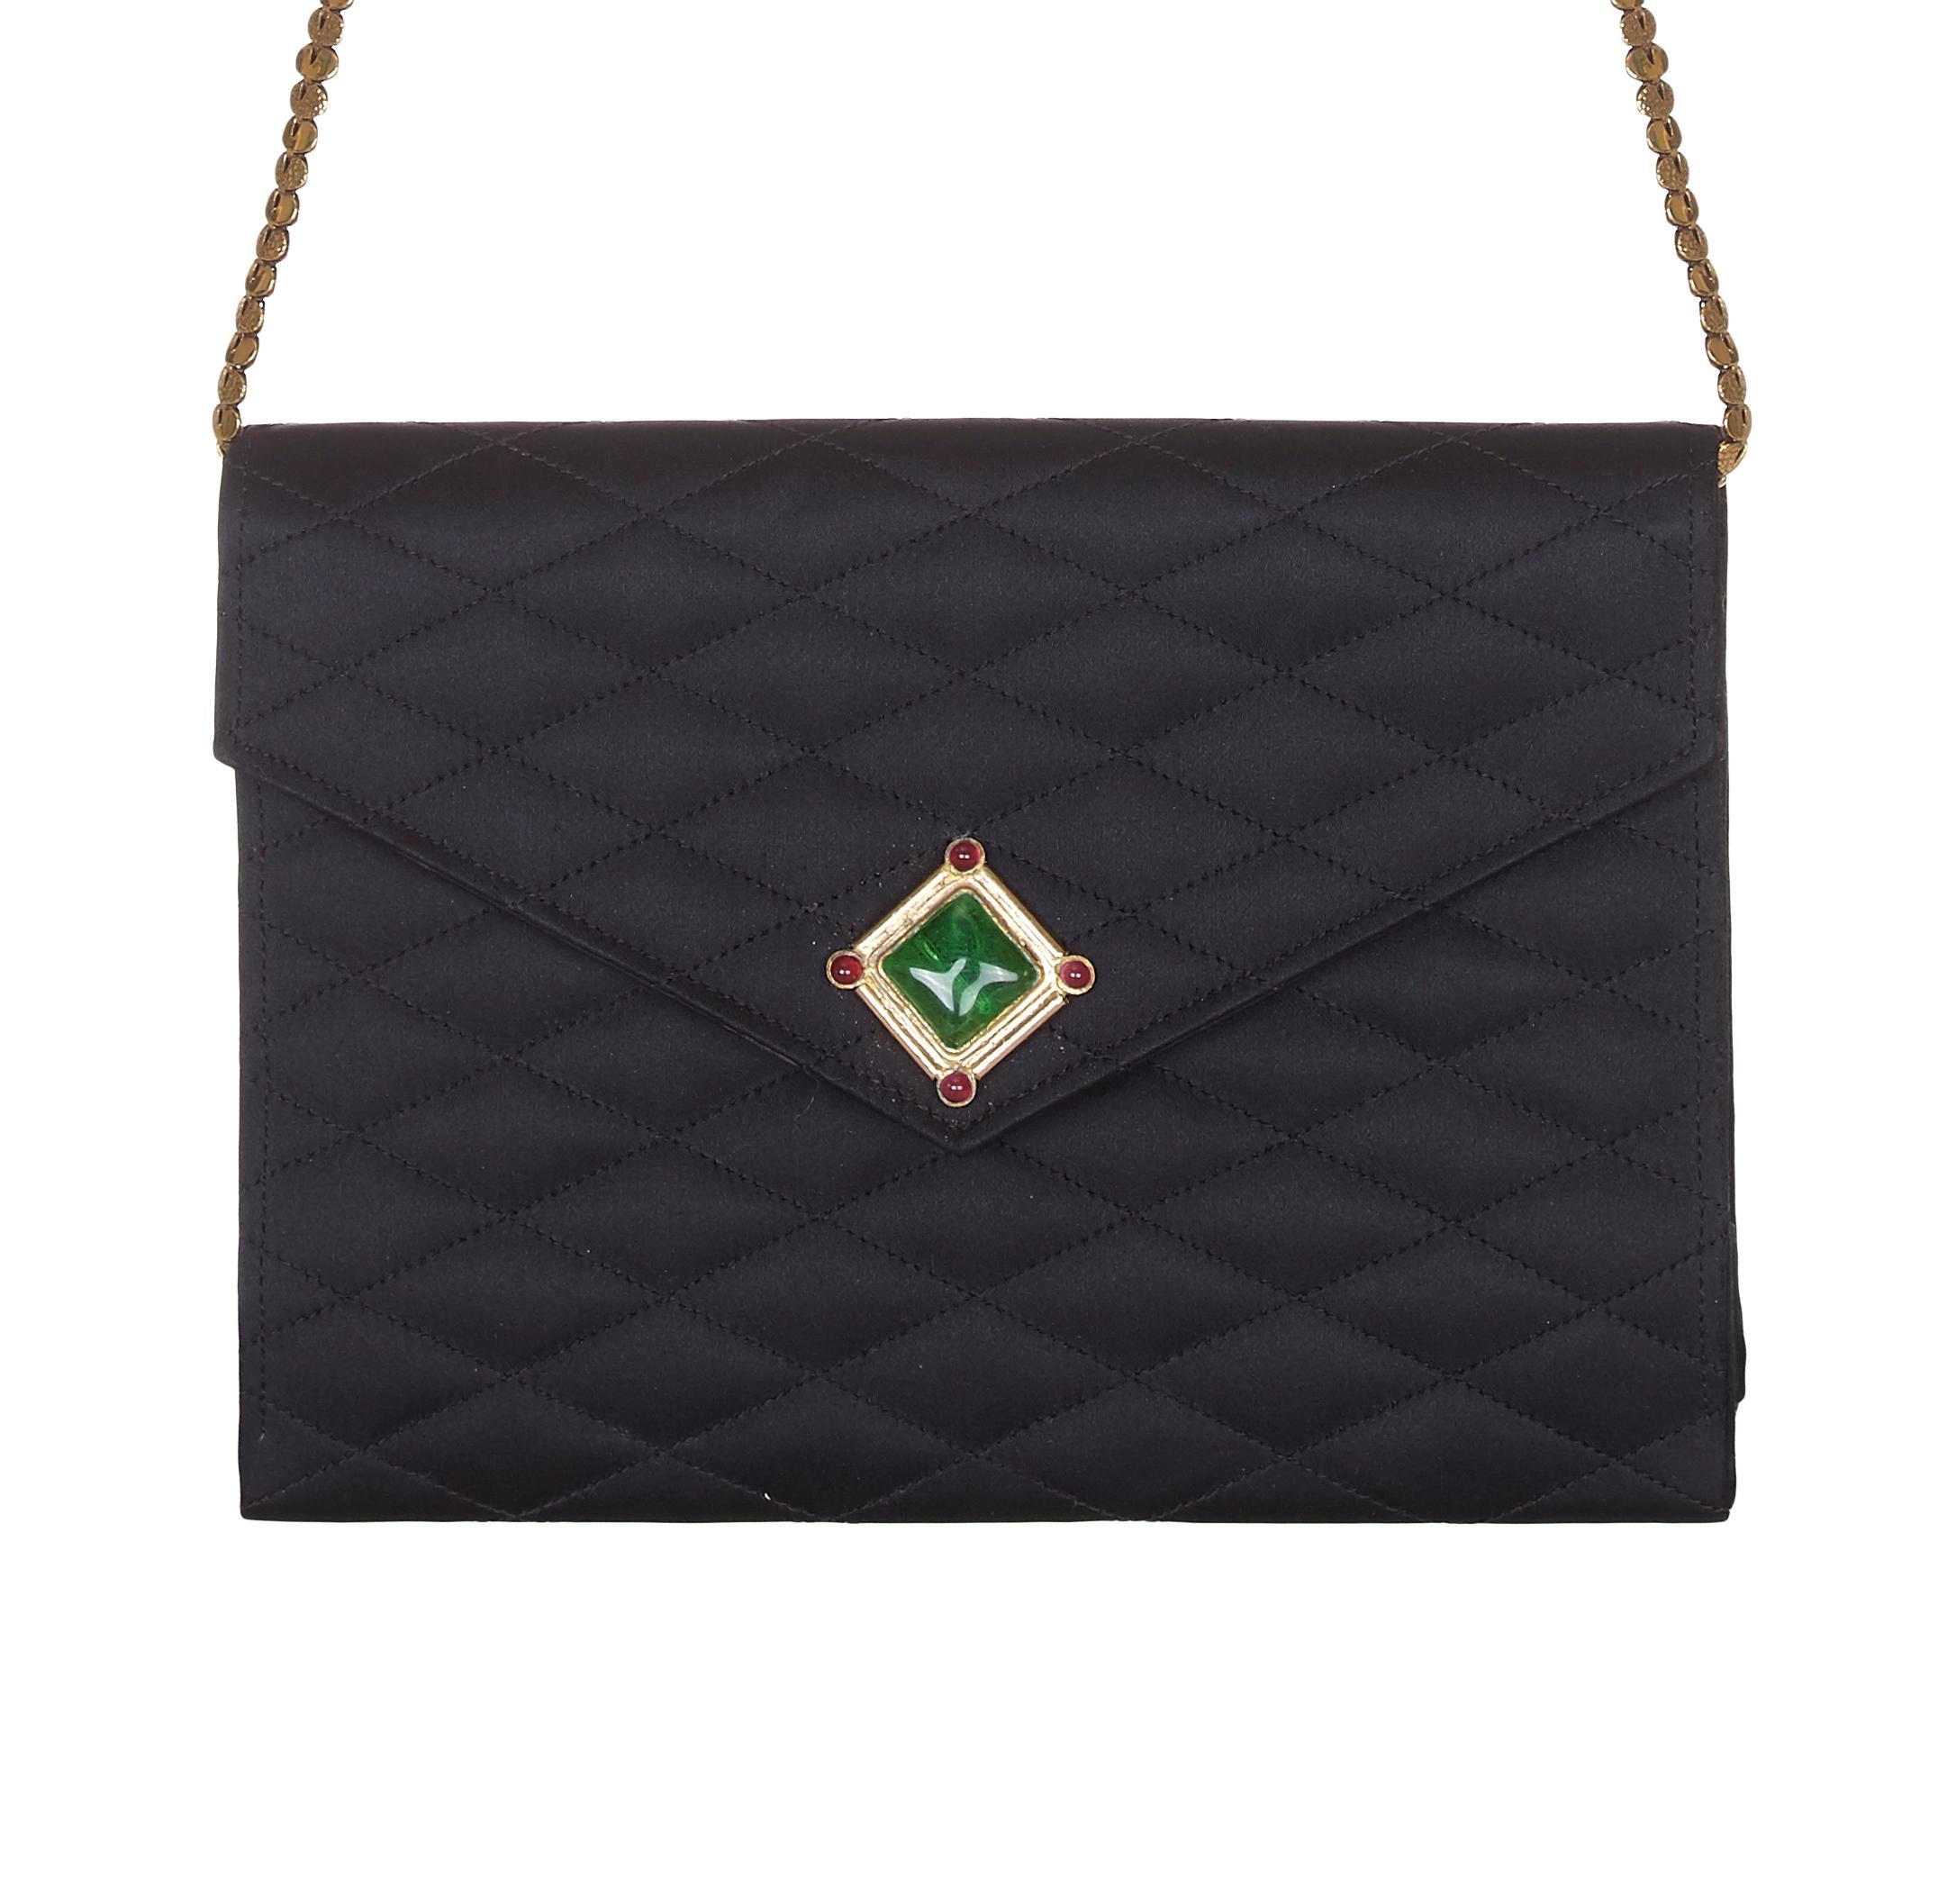 Lovely vintage early 1980s quilted black satin Chanel evening bag with green gripoix glass decoration and gold chain strap.  The strap is long enough to be worn over the shoulder or alternatively it can be tucked inside to use the bag as a clutch. 